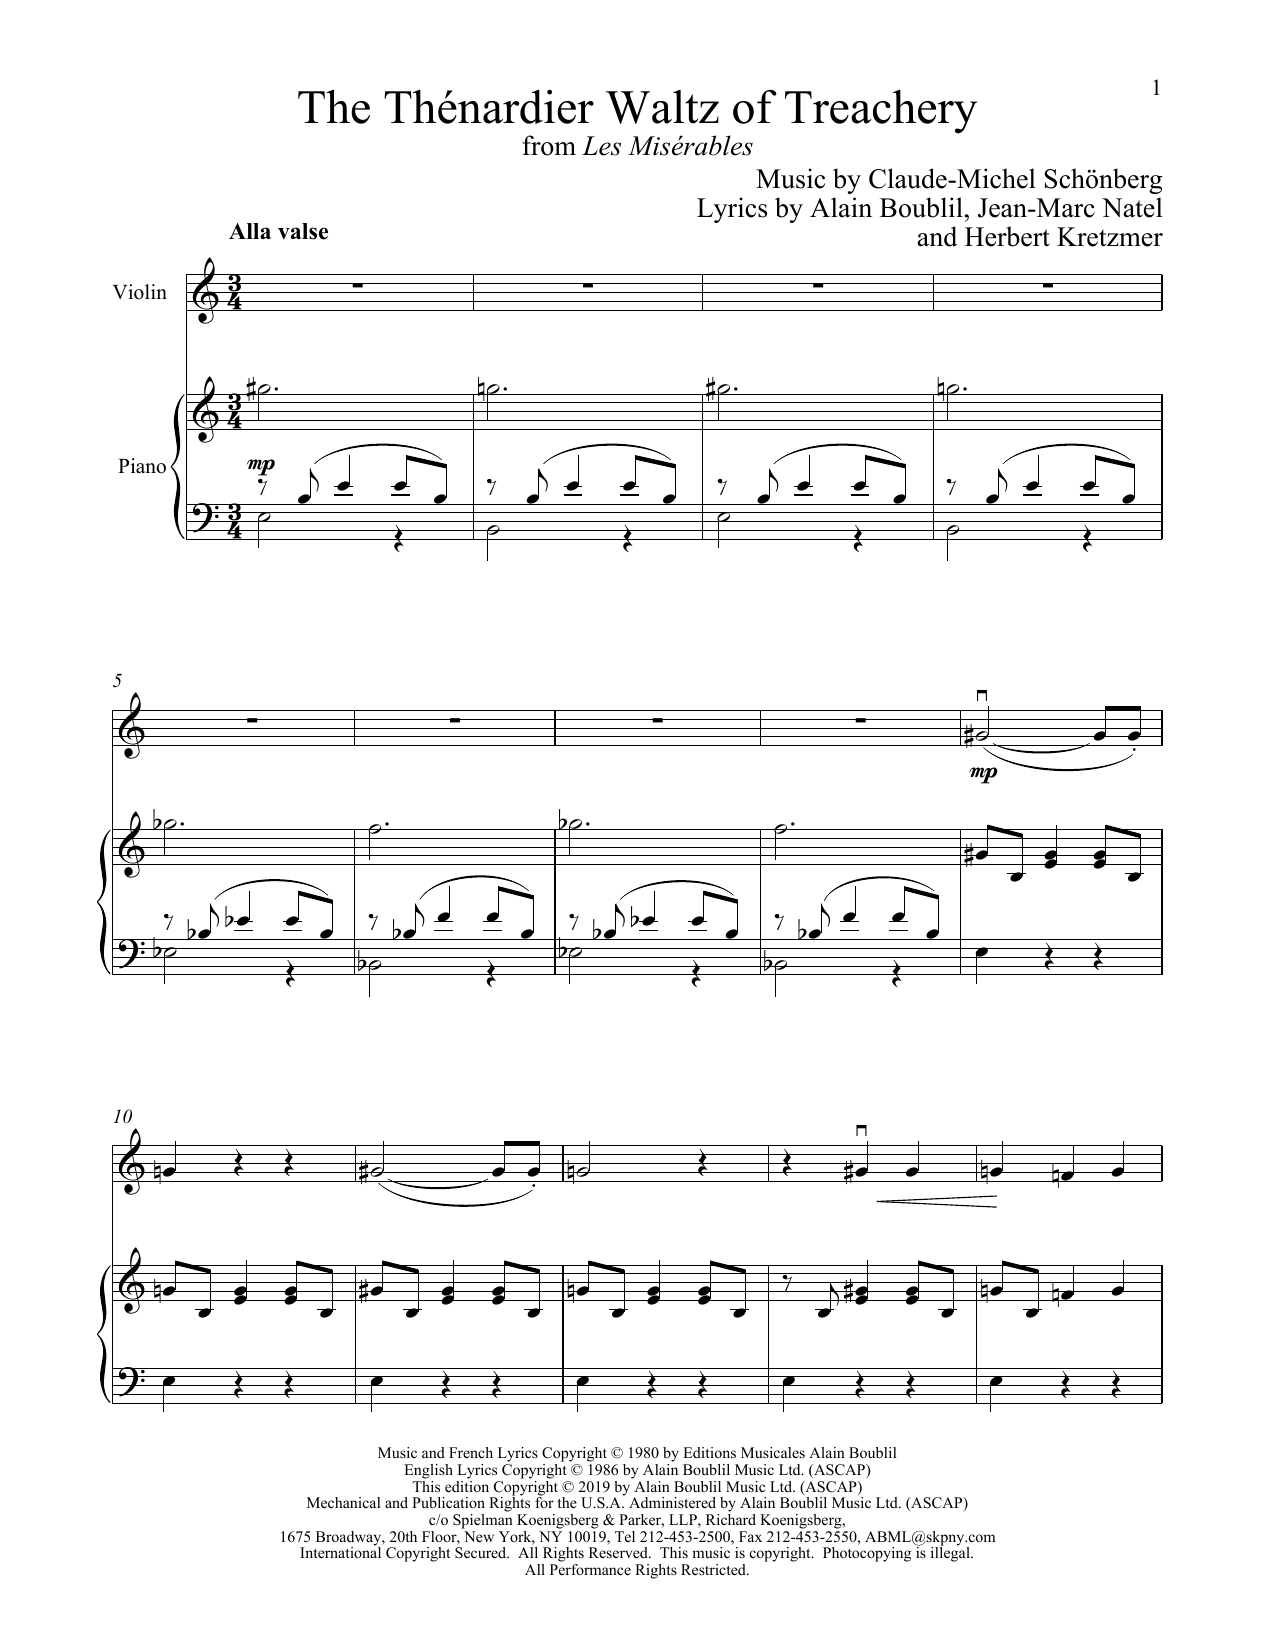 Boublil and Schonberg The Thénardier Waltz Of Treachery (from Les Miserables) sheet music notes and chords. Download Printable PDF.